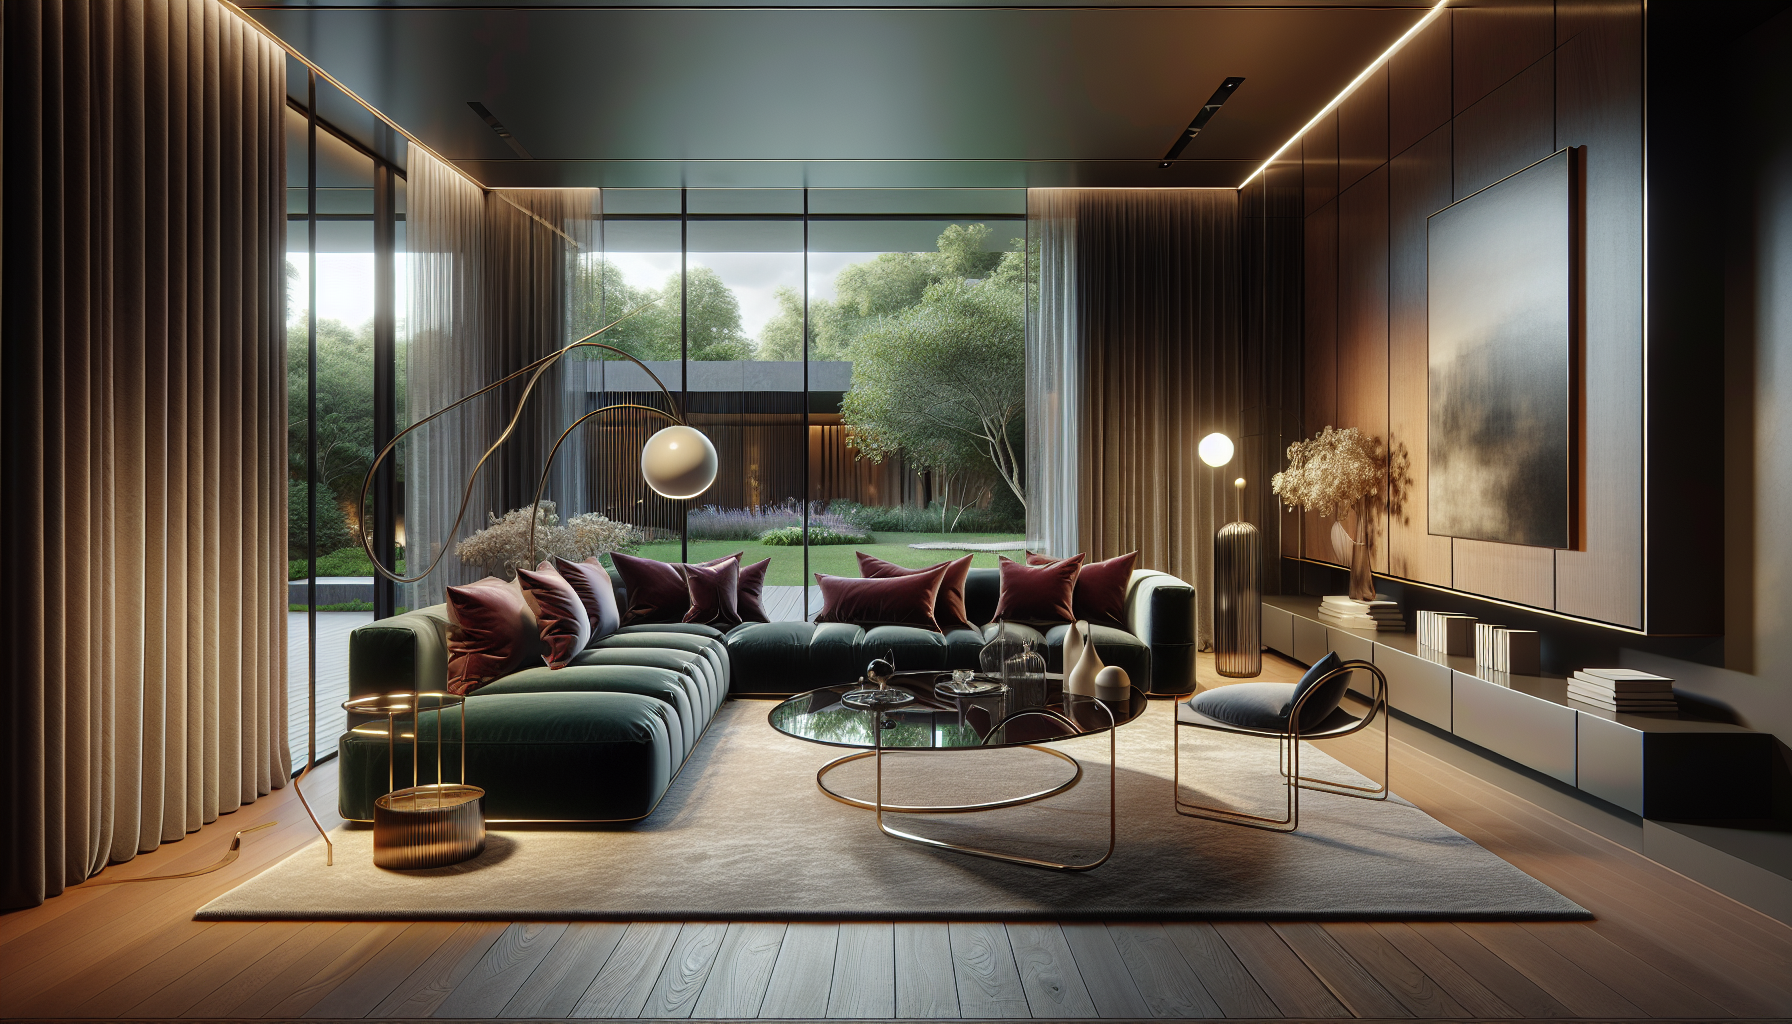 Artistic depiction of a well-staged living room with modern furniture